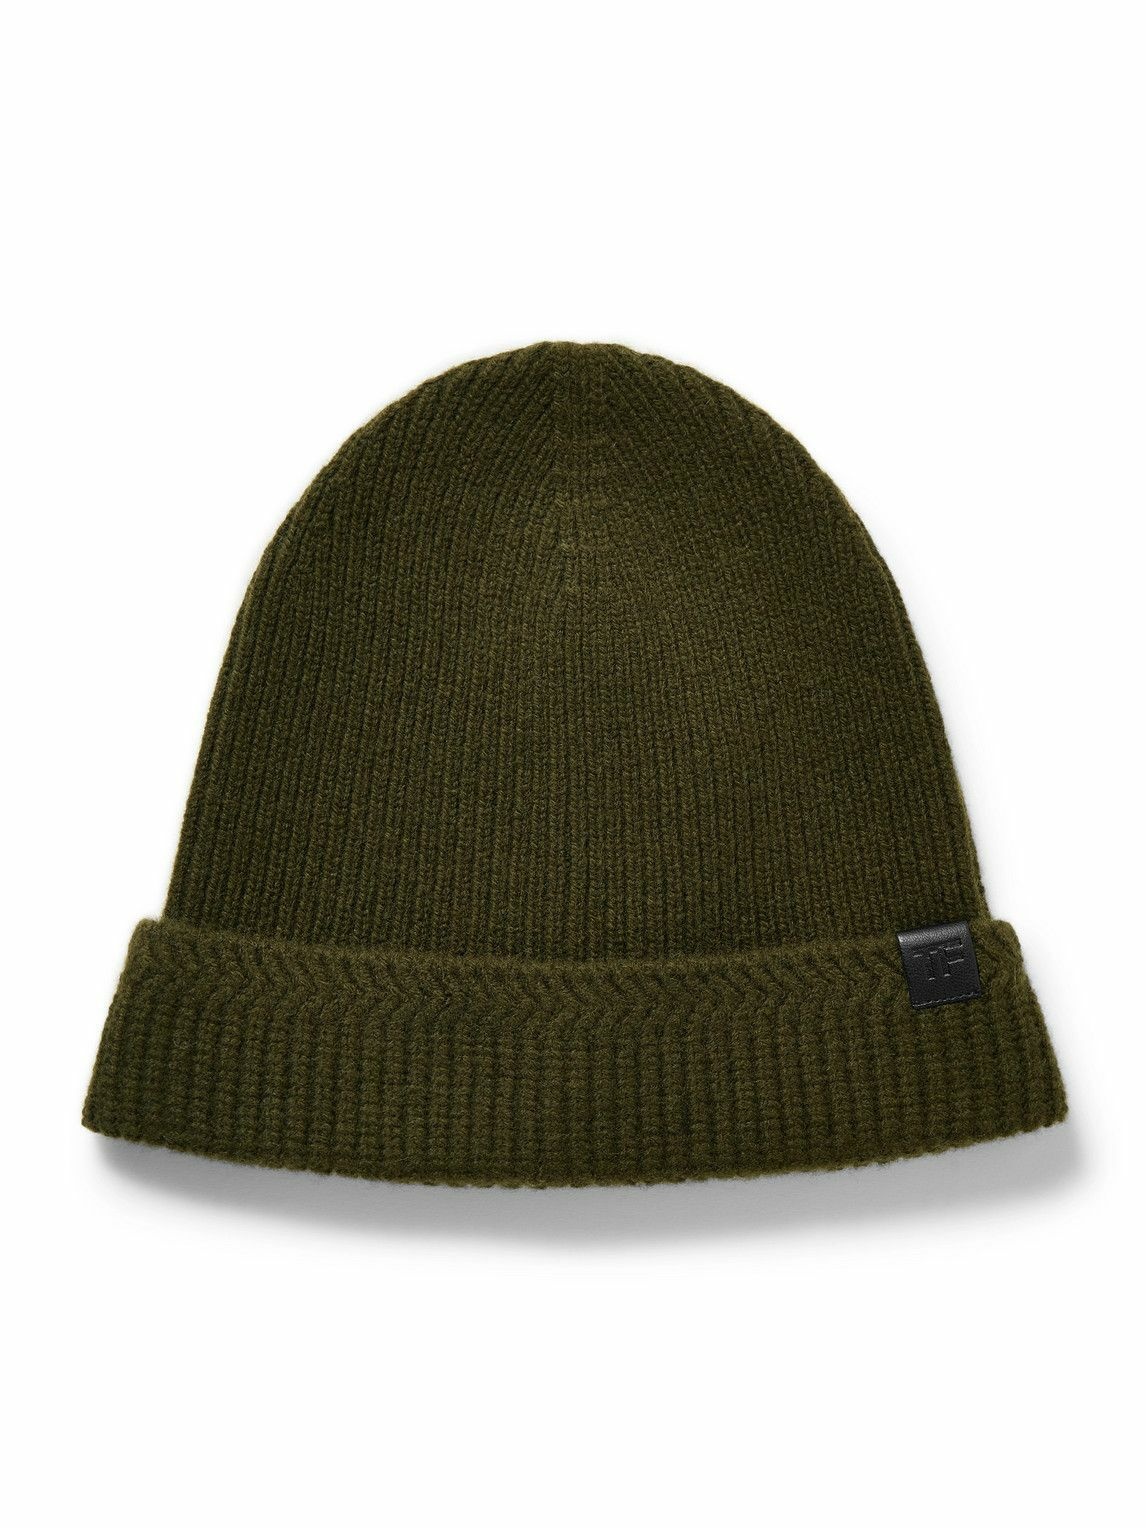 Photo: TOM FORD - Leather-Trimmed Ribbed Wool and Cashmere-Blend Beanie - Green